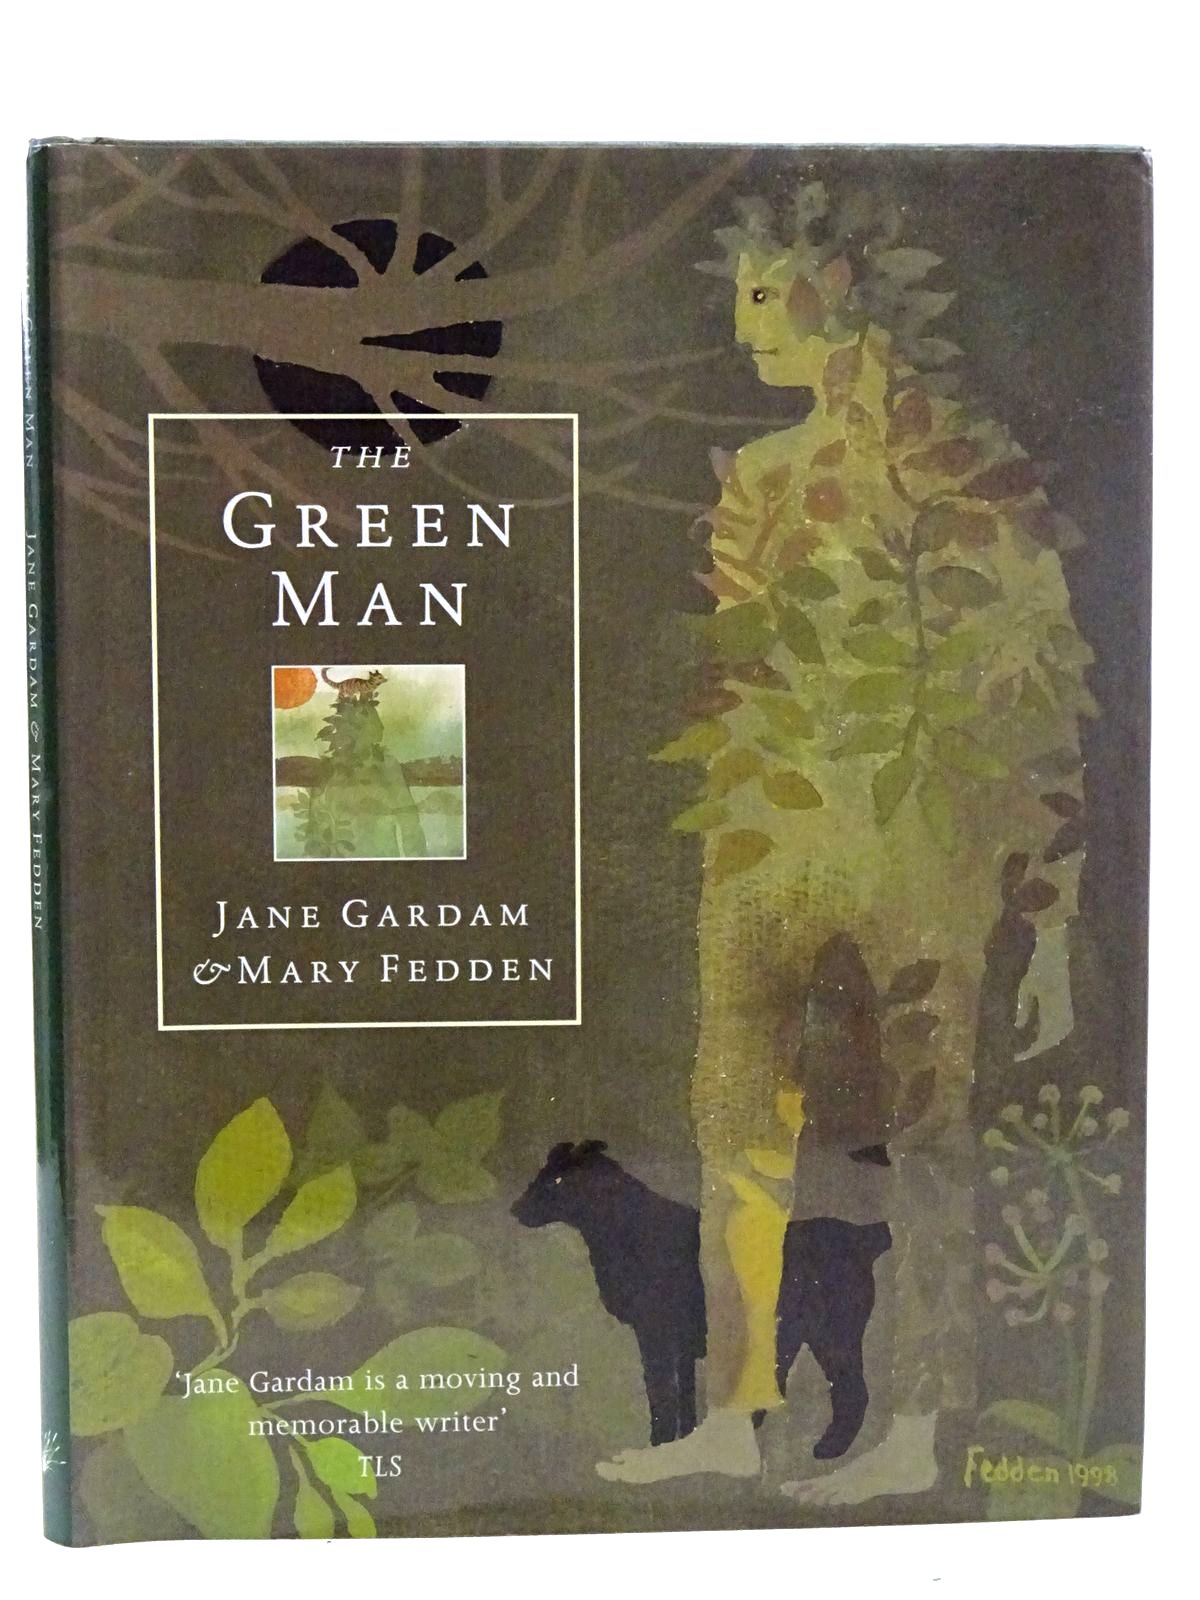 Cover of THE GREEN MAN: AN ETERNITY by Jane Gardam